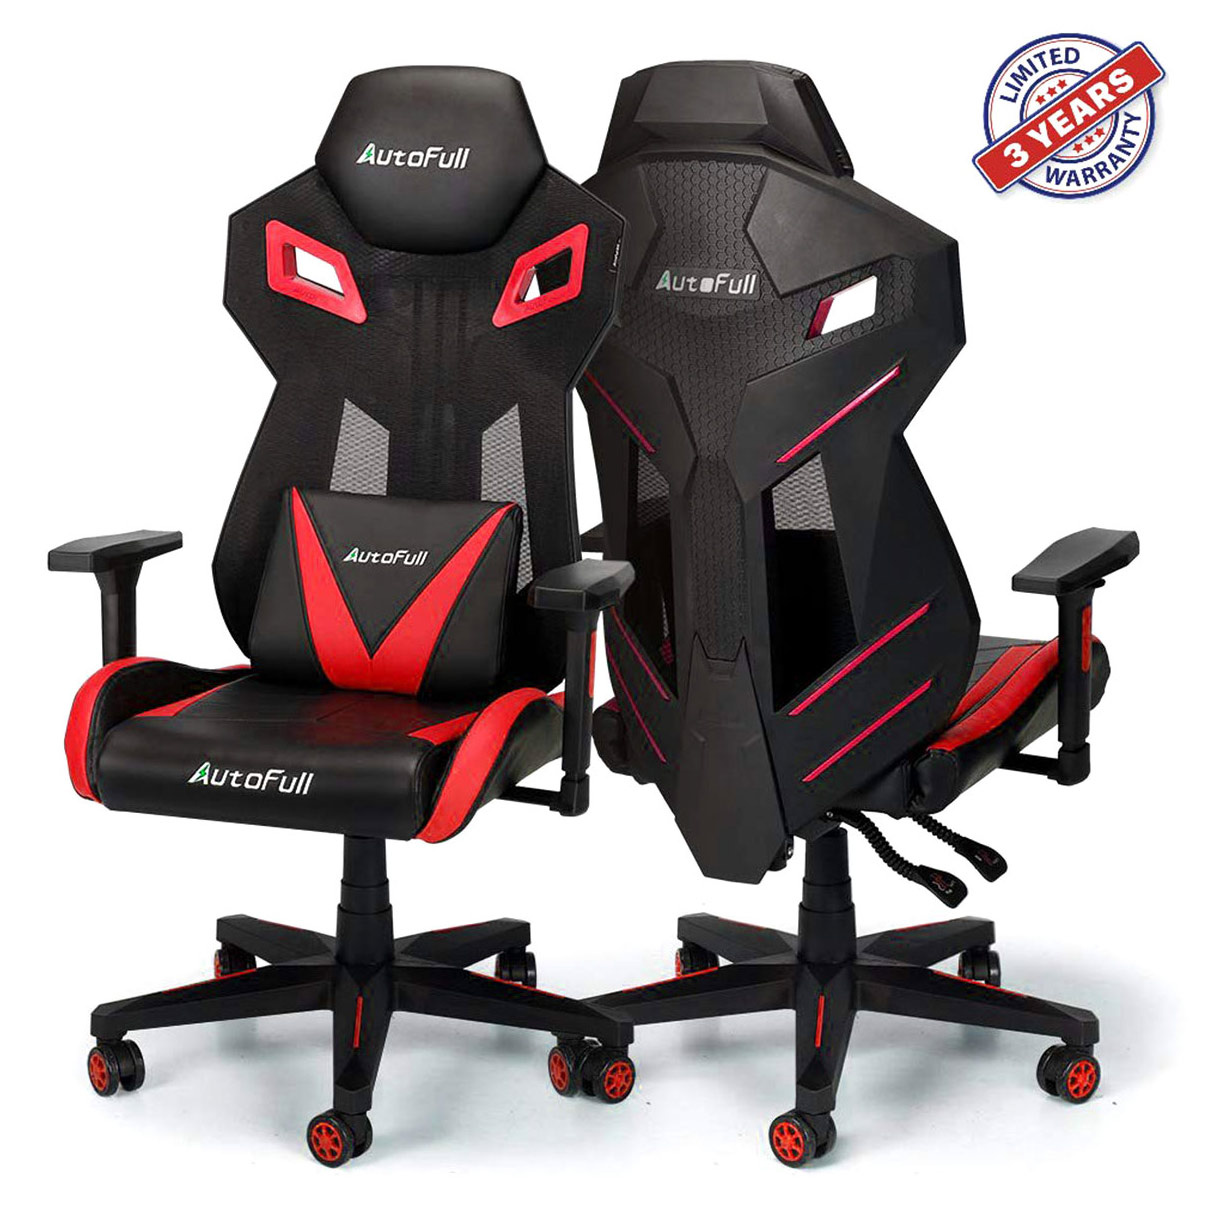 Best Authorized Brands Gaming Chair Autofull Chair For Game